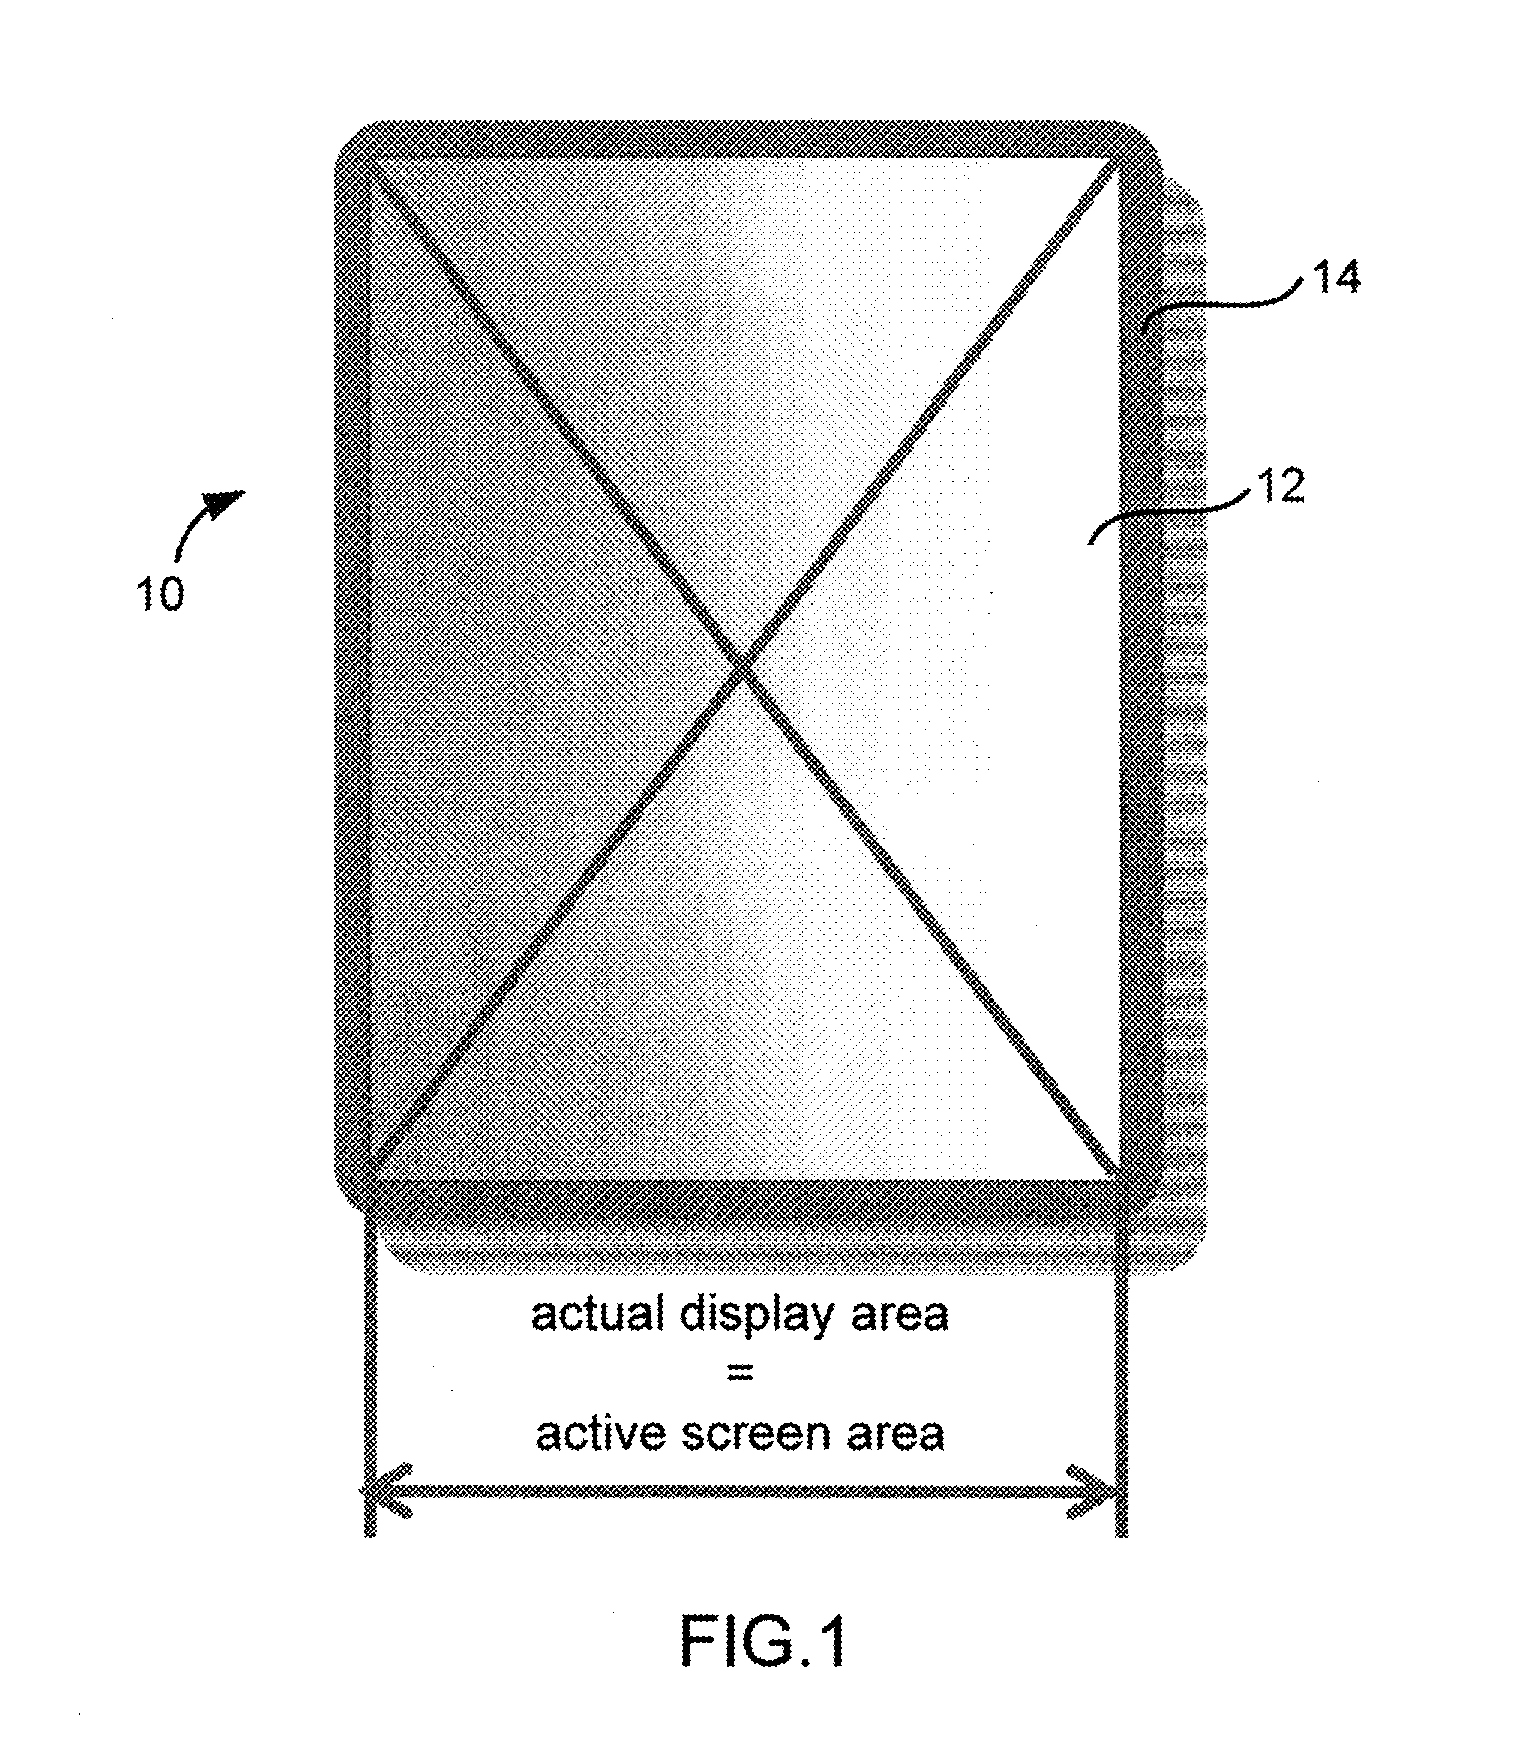 System and Method for Dynamically Resizing an Active Screen of a Handheld Device